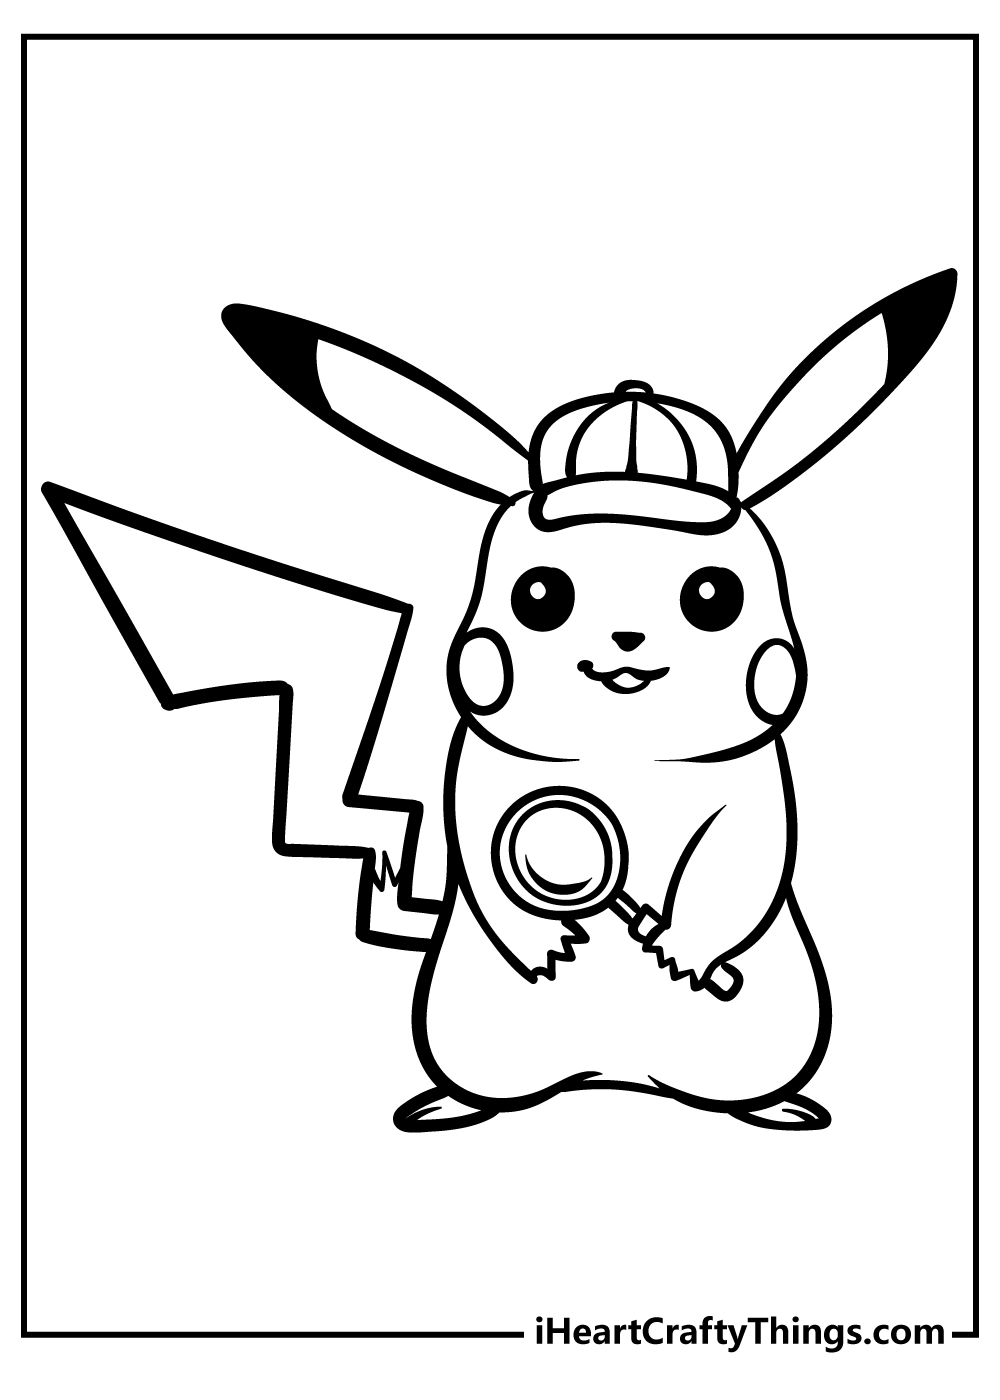 Detective Pikachu Coloring Pages Coloring Nation